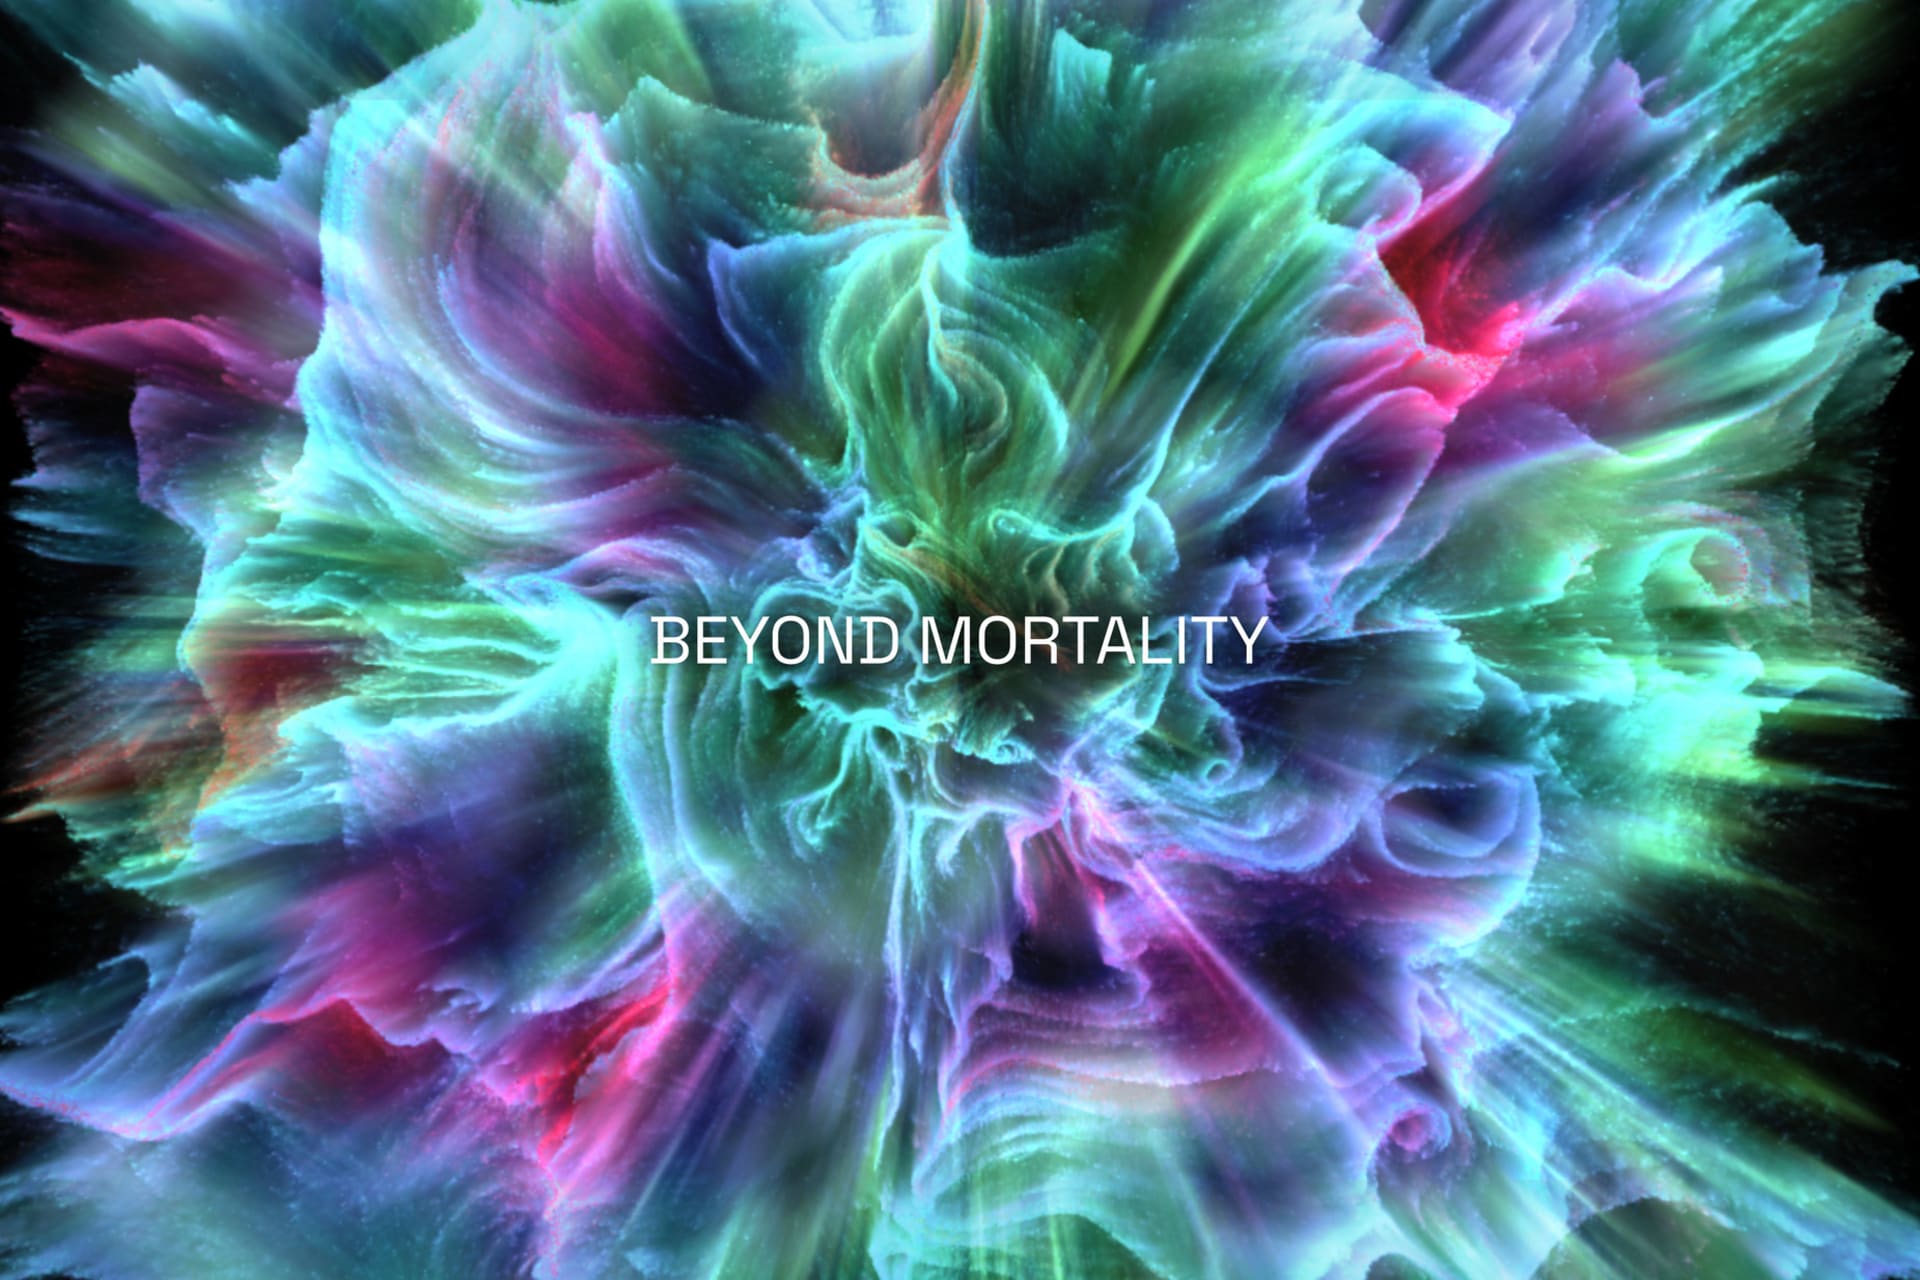 A neon, 3D bloom radiates in swirling blues, greens, pinks, and purples, with BEYOND_MORTALITY in white at the bottom.